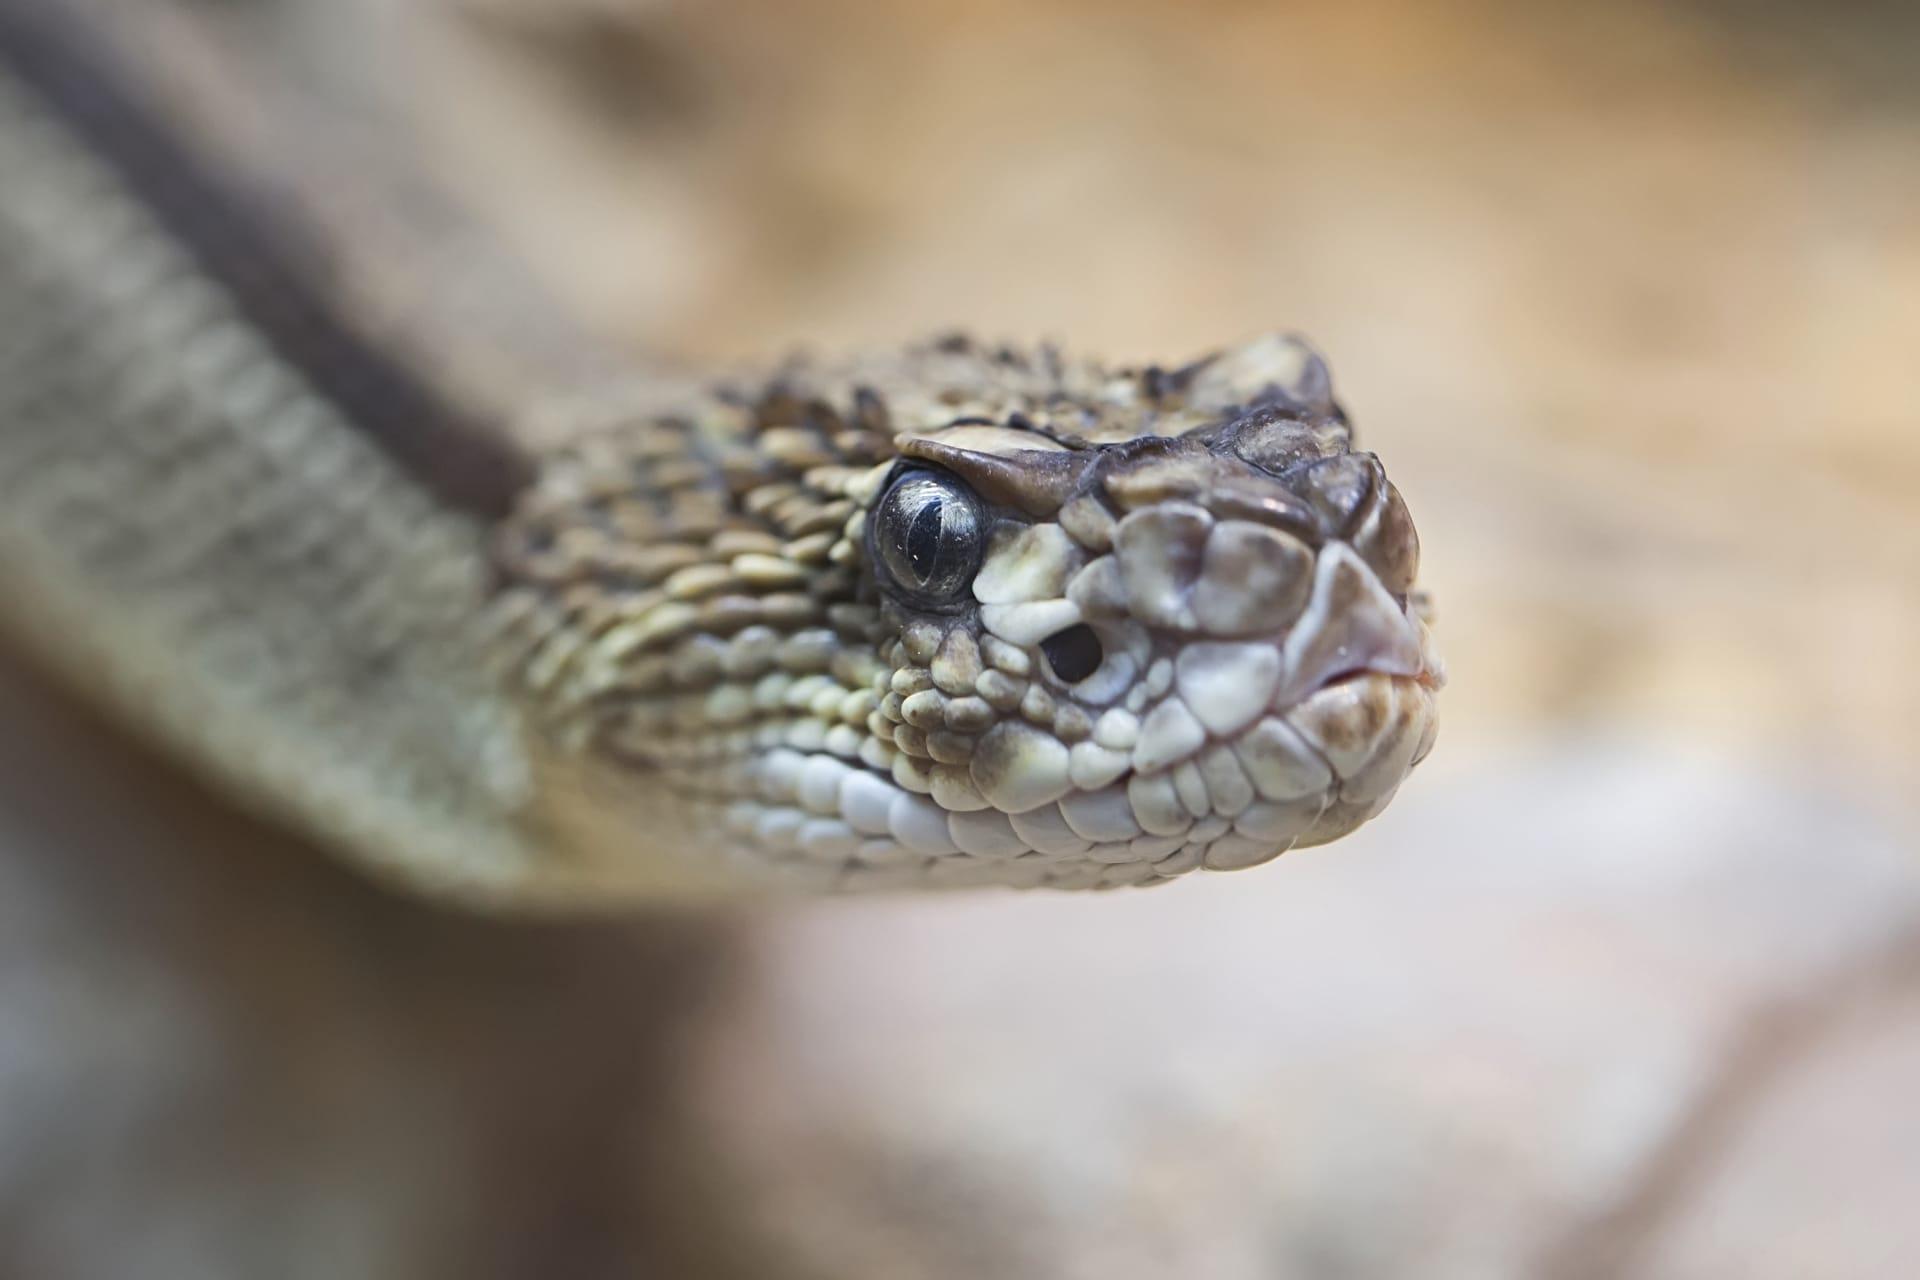 Rattlesnake pictures